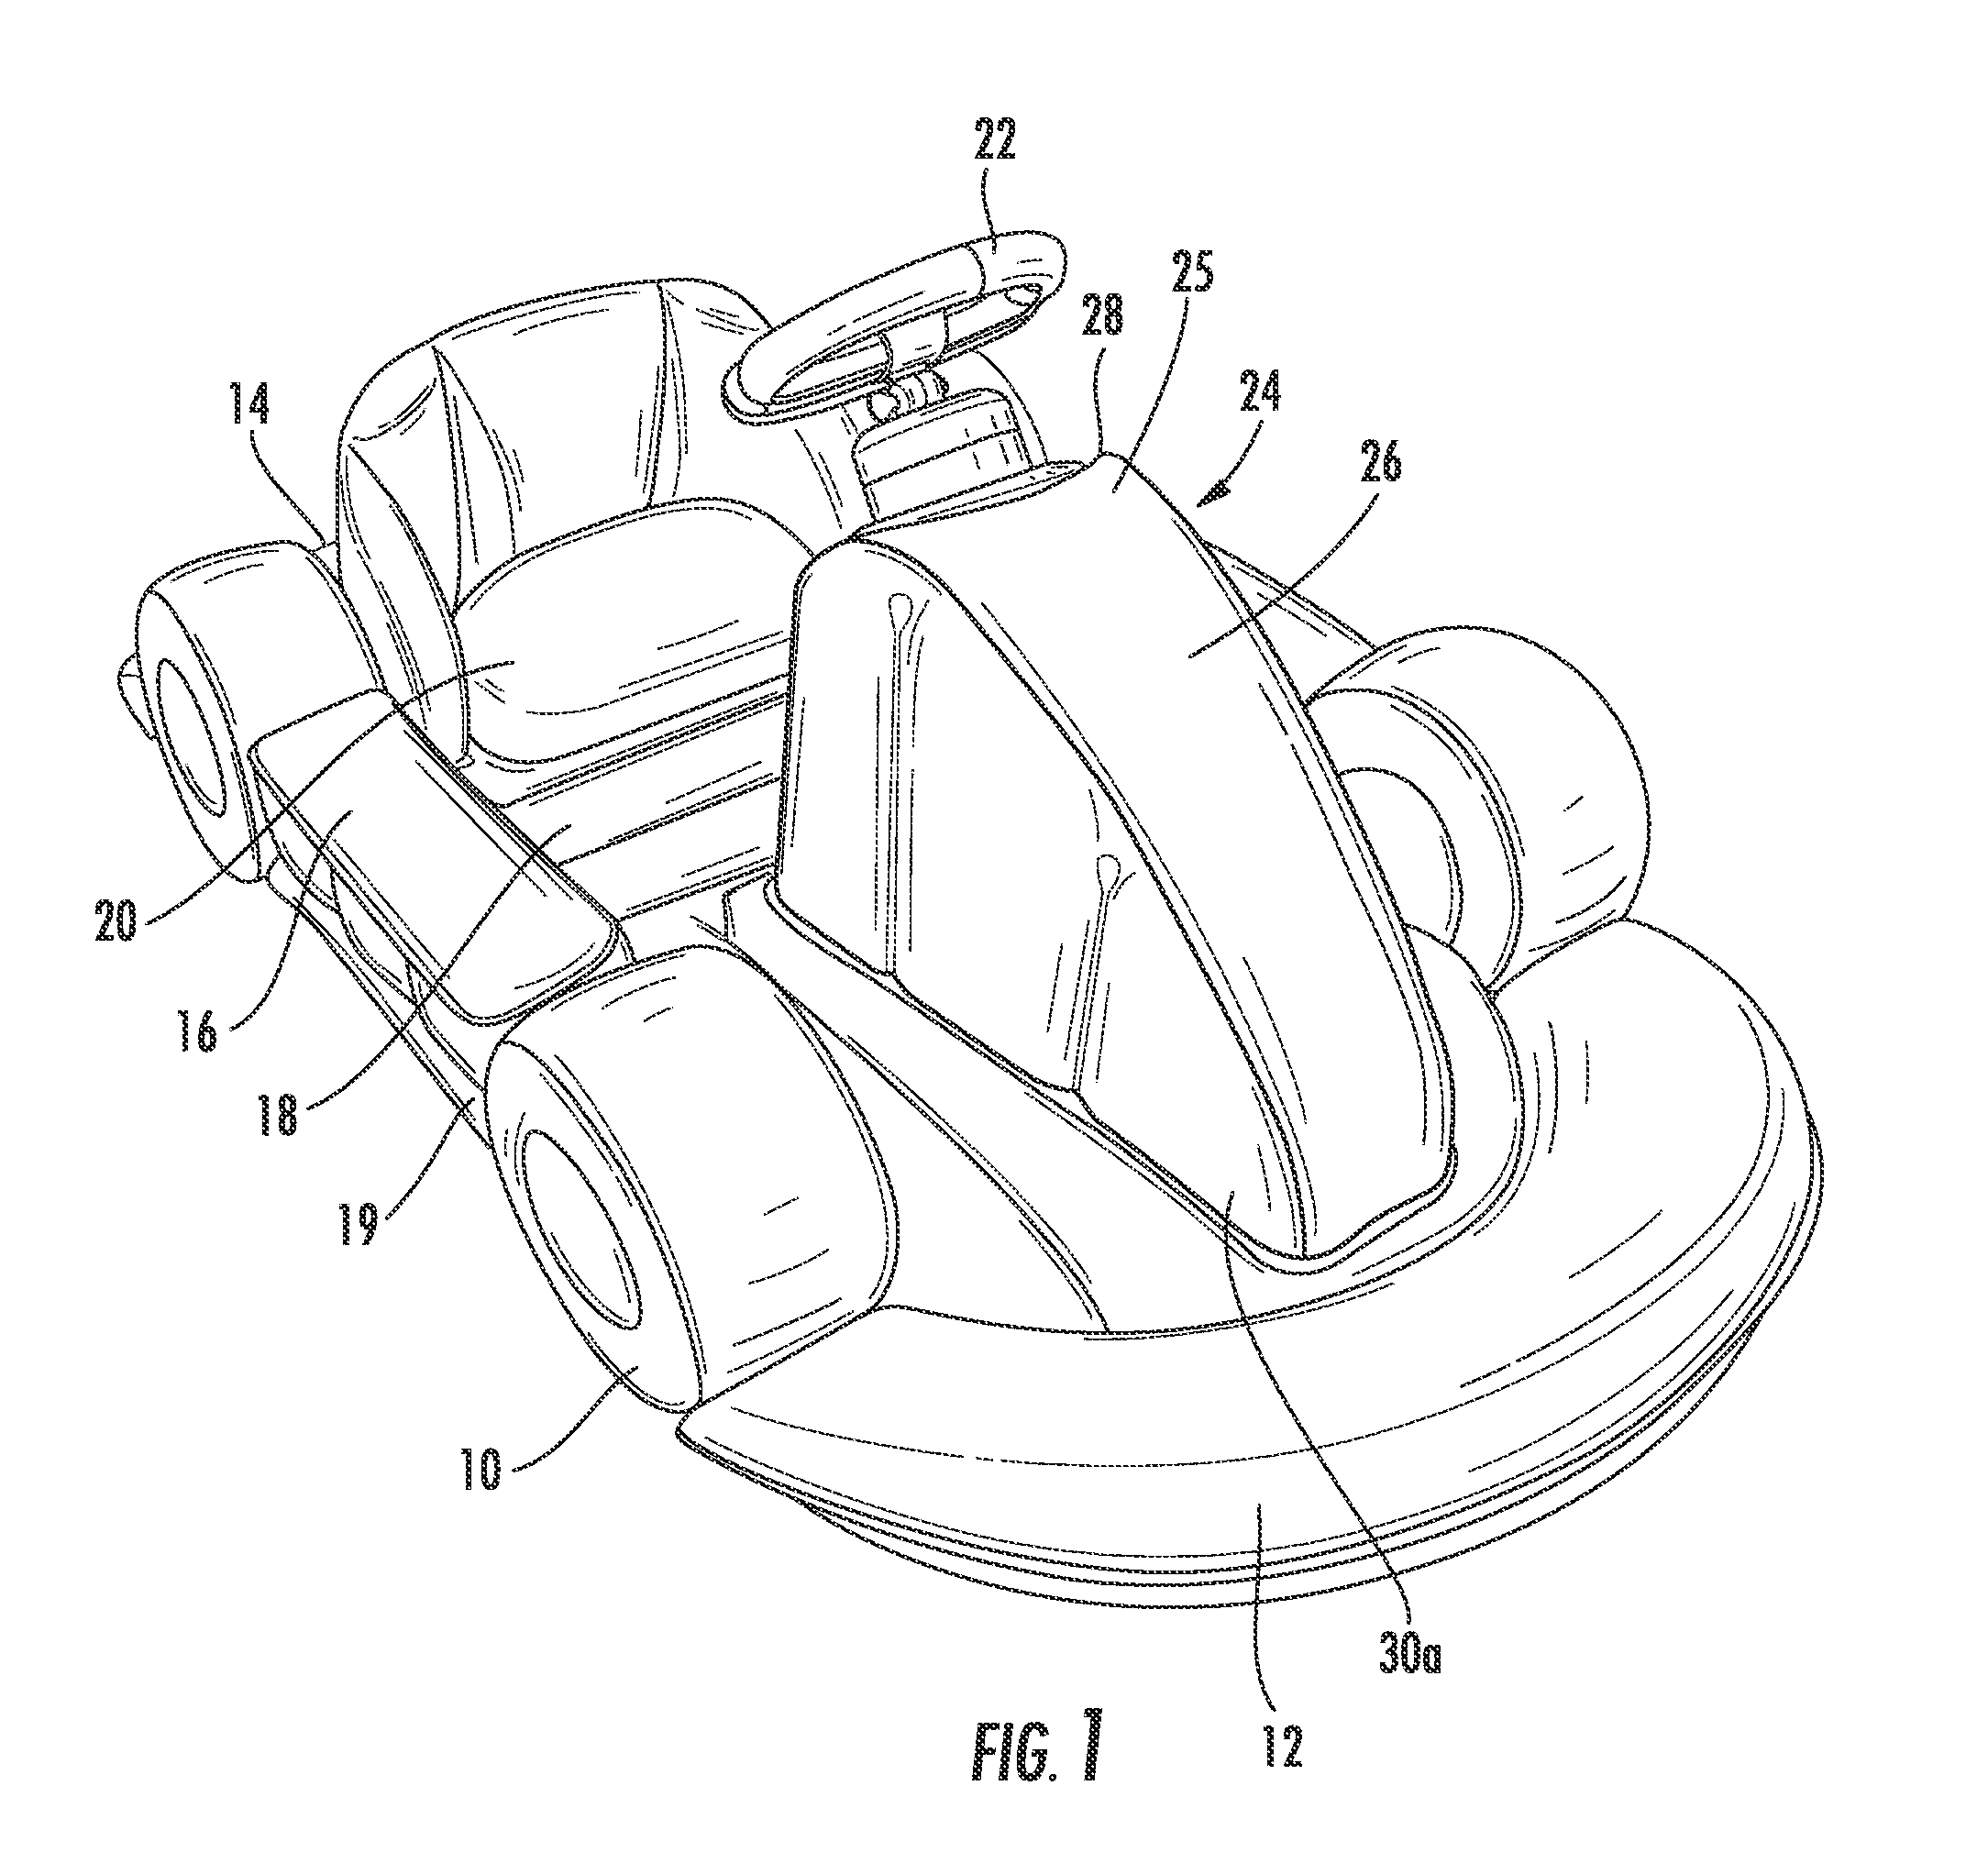 Inflatable Vehicles for Simulating Driving for use with Handheld Video Games